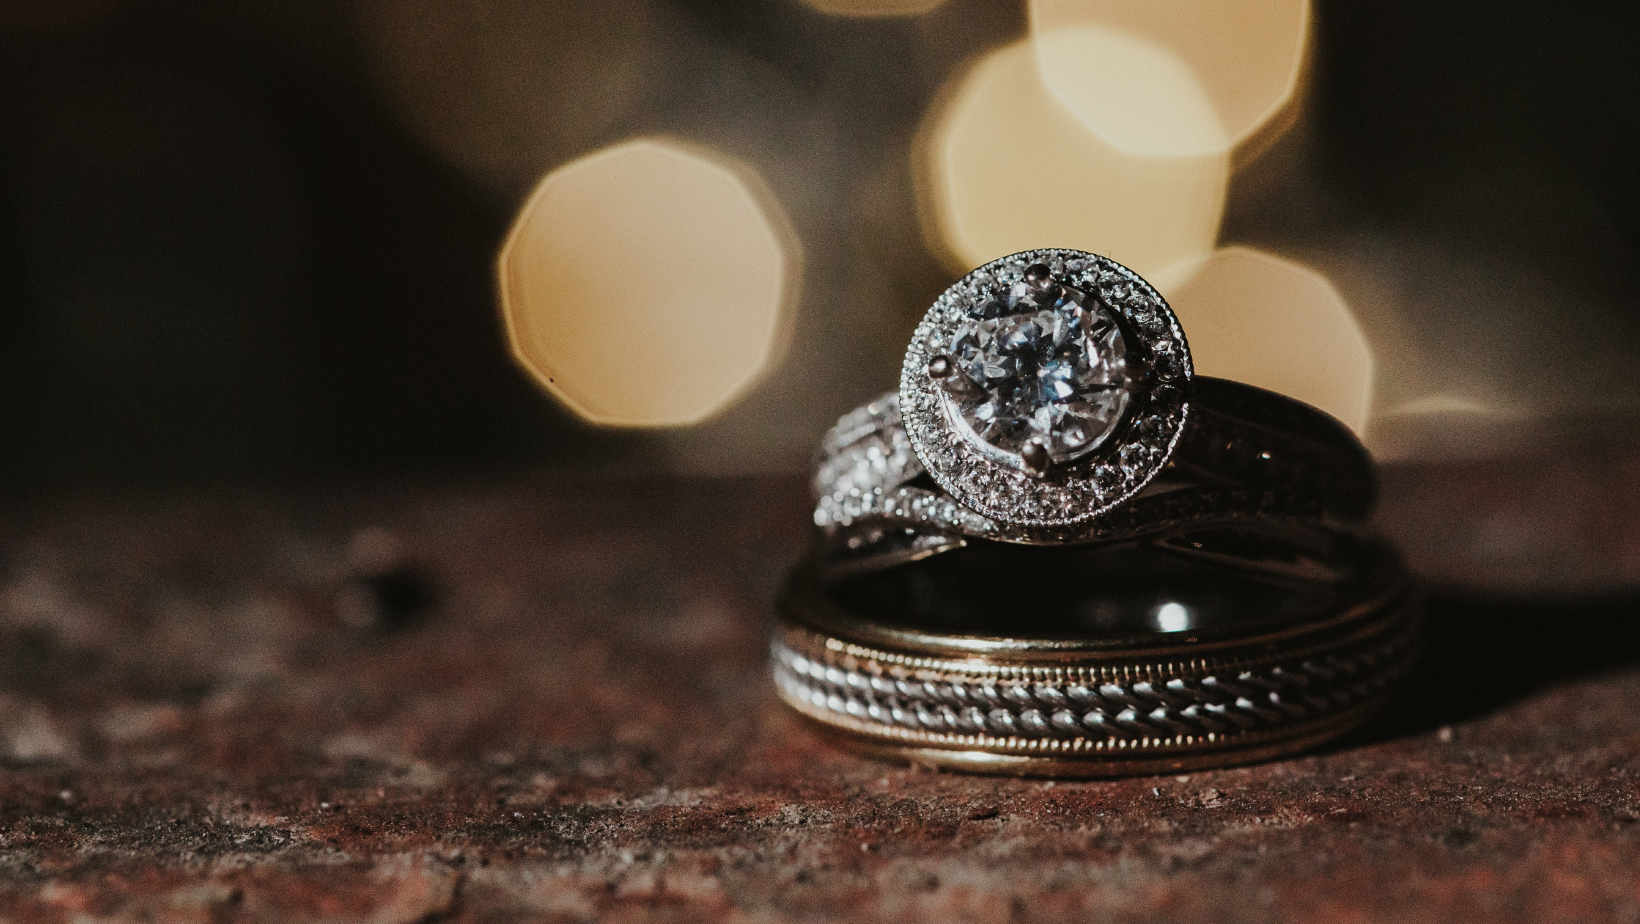 The Definitive Guide To Selecting The Perfect Men's Black Diamond Wedding Ring